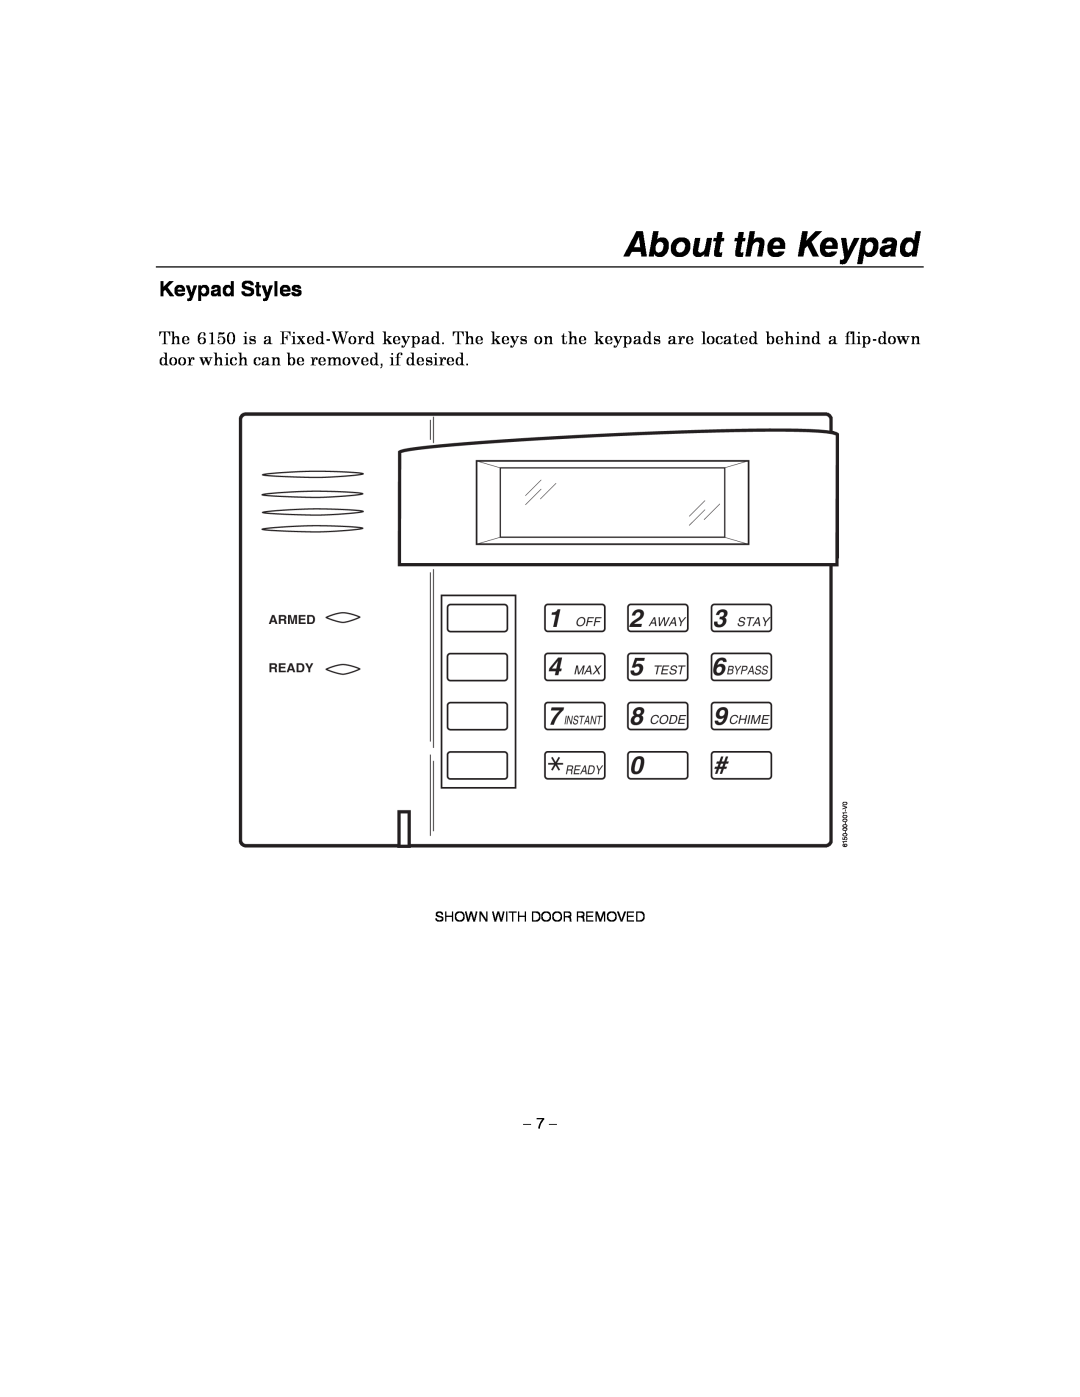 Honeywell 4110XM manual About the Keypad, Keypad Styles, Armed Ready, Away, Stay, Test, Code, 6BYPASS, Instant, Chime 